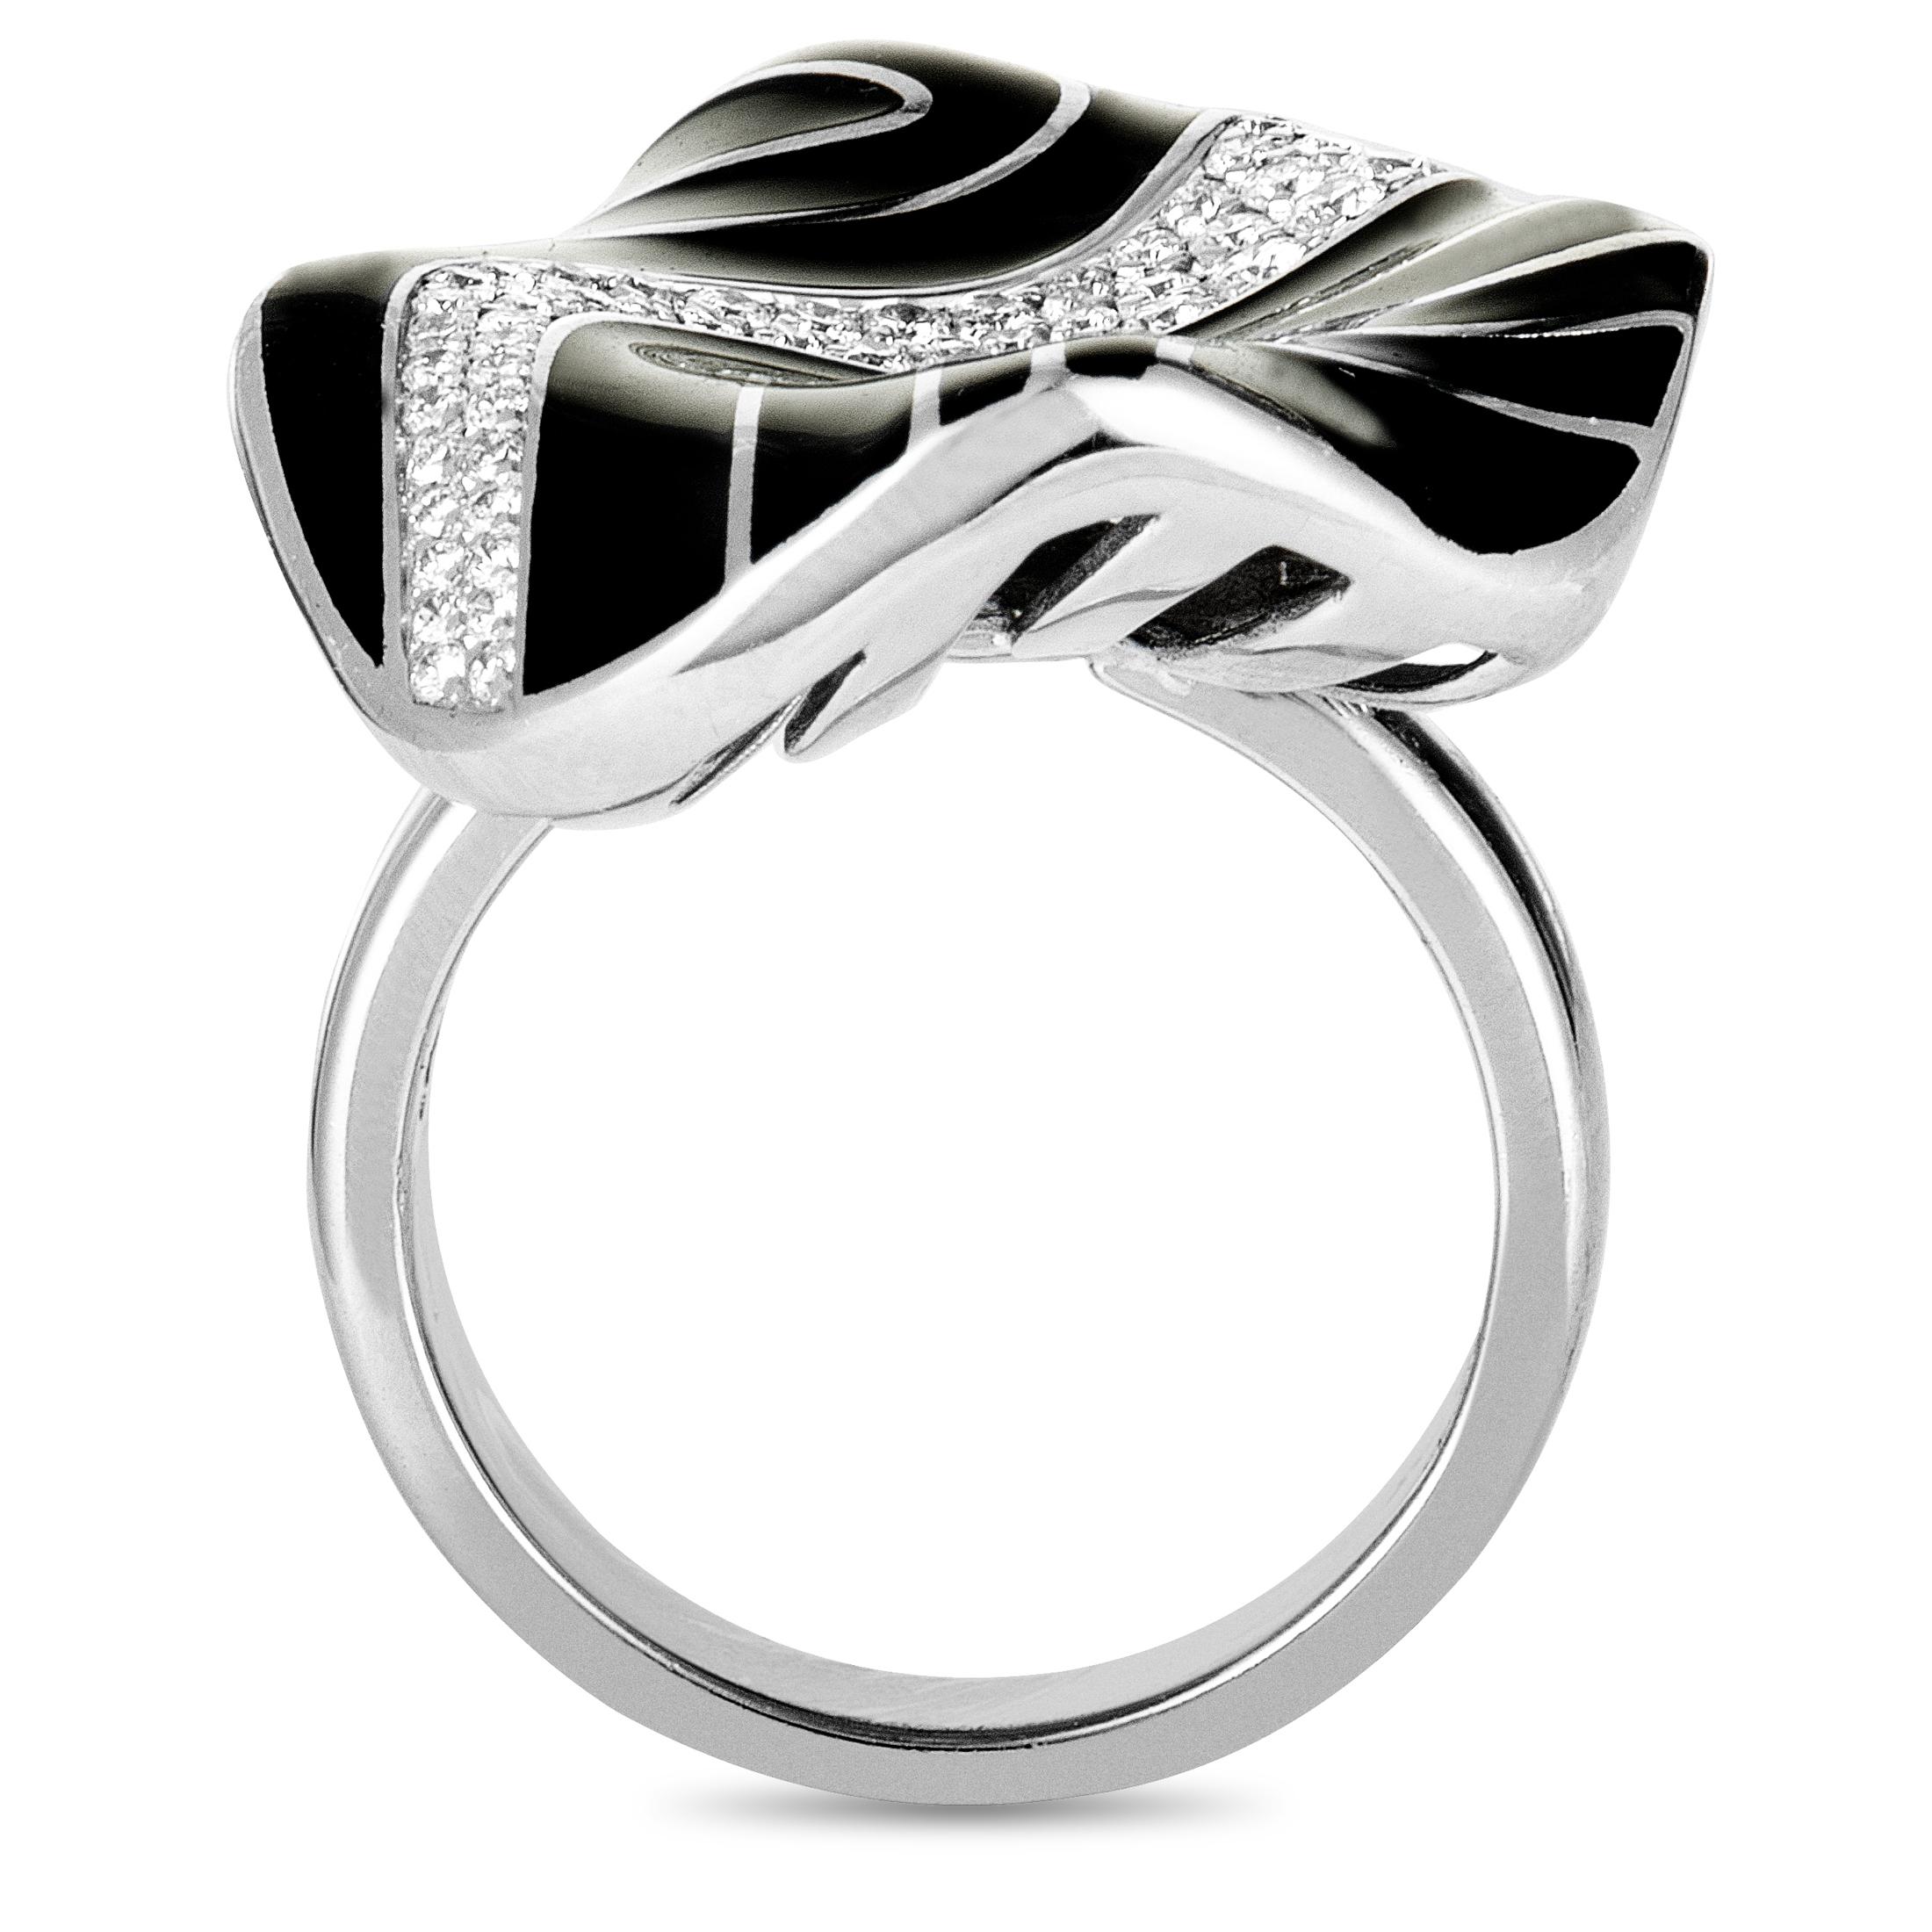 This fantastic Roberto Coin ring is beautifully crafted from elegant 18K white gold and embellished with lustrous white diamonds and striking black enamel, offering an incredibly eye-catching appearance. The diamonds weigh 0.56 carats in total.
